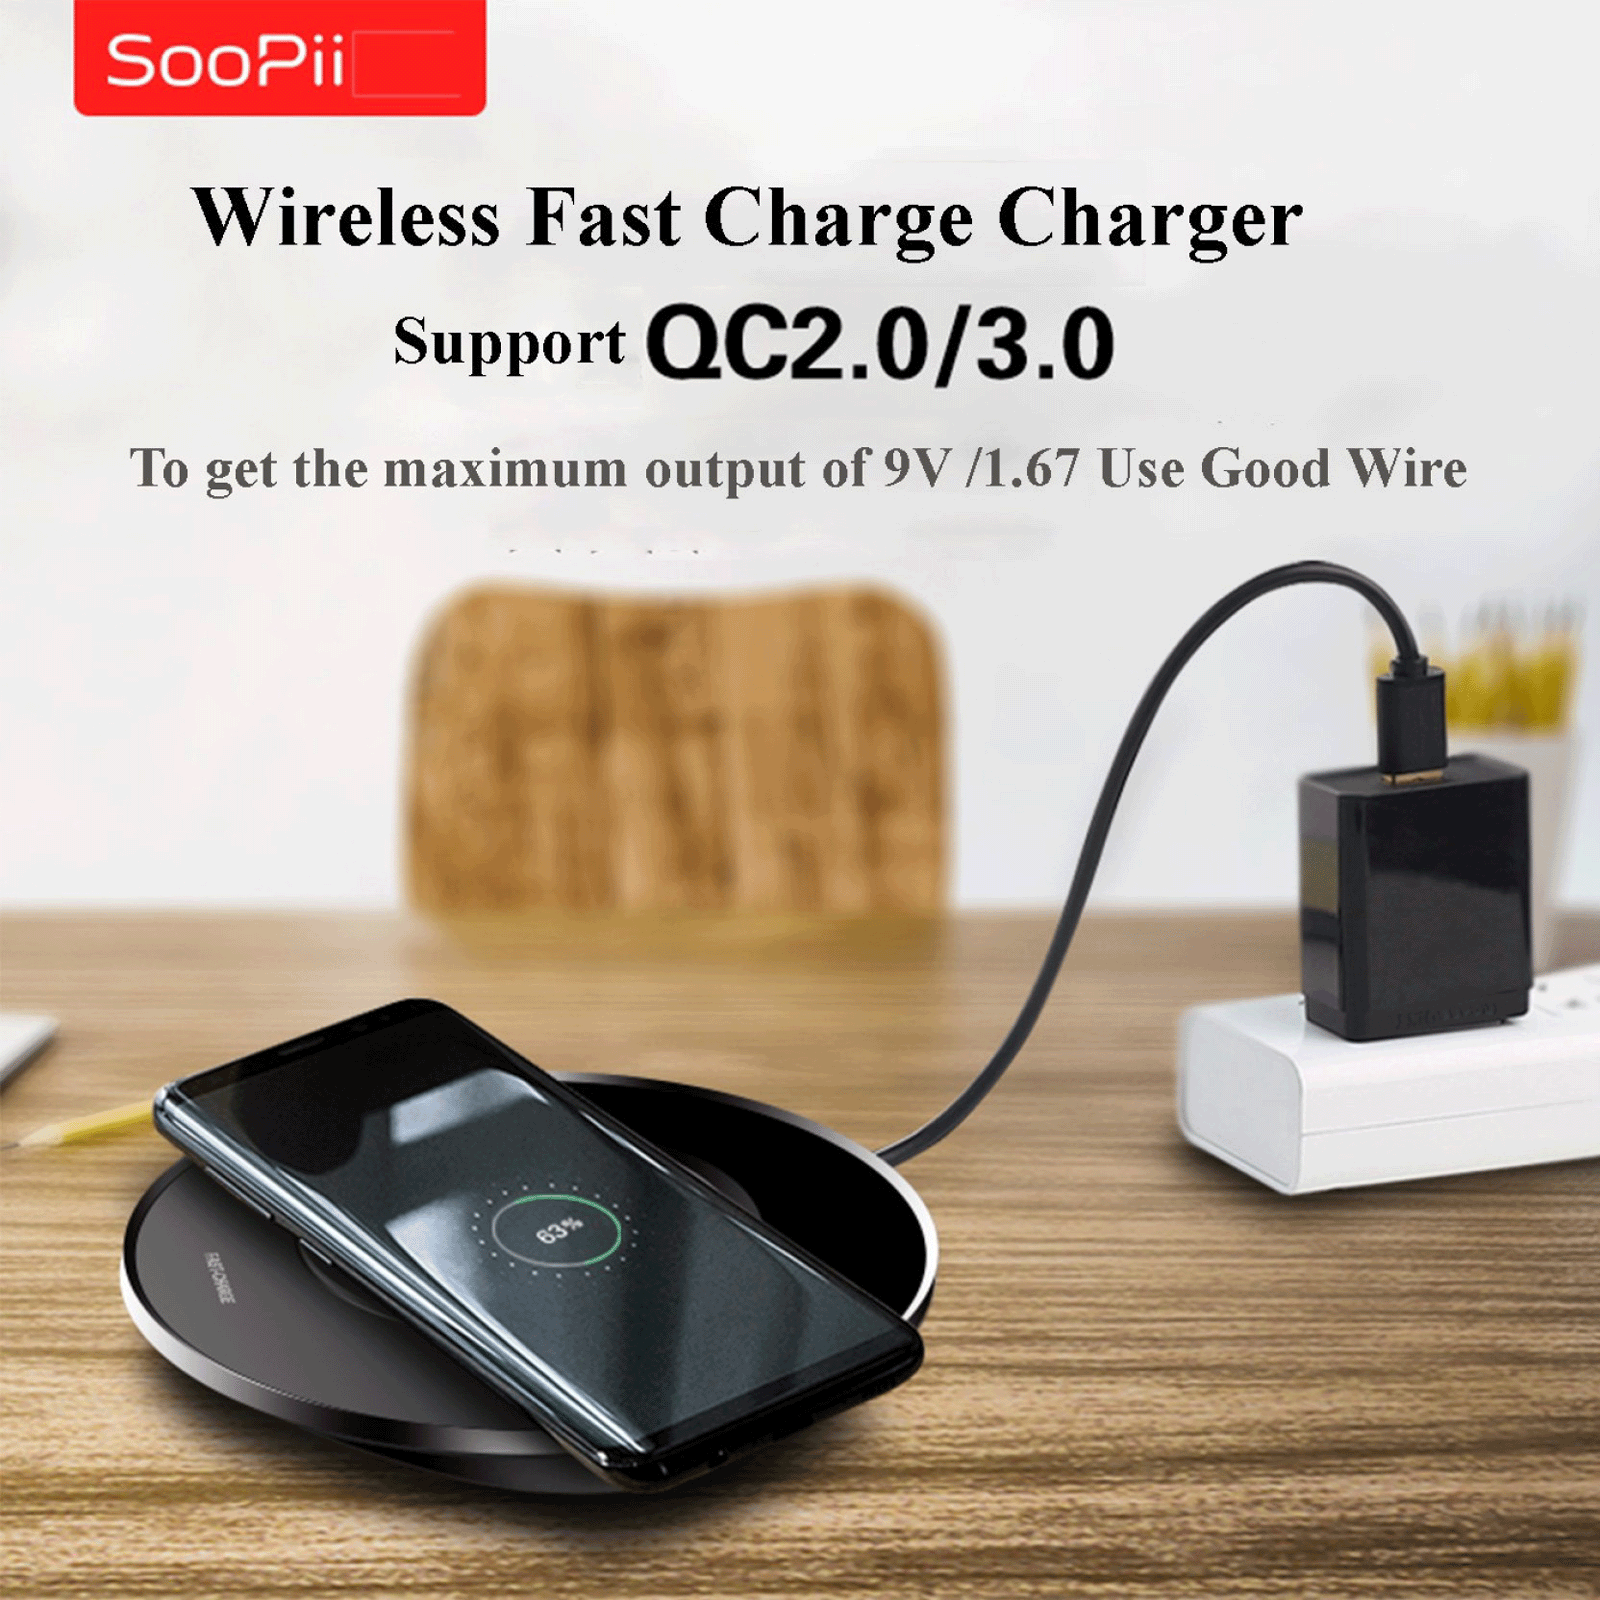 Buy Soopii 10W Wireless Charger for iPhone 11, 11 Pro, 11 Pro Max, XS Max,  XS, XR, X, 8, 8 Plus/SAMSUNG Note 10, 10 Plus, S10, S10 Plus, S10E, Note 9,  S9